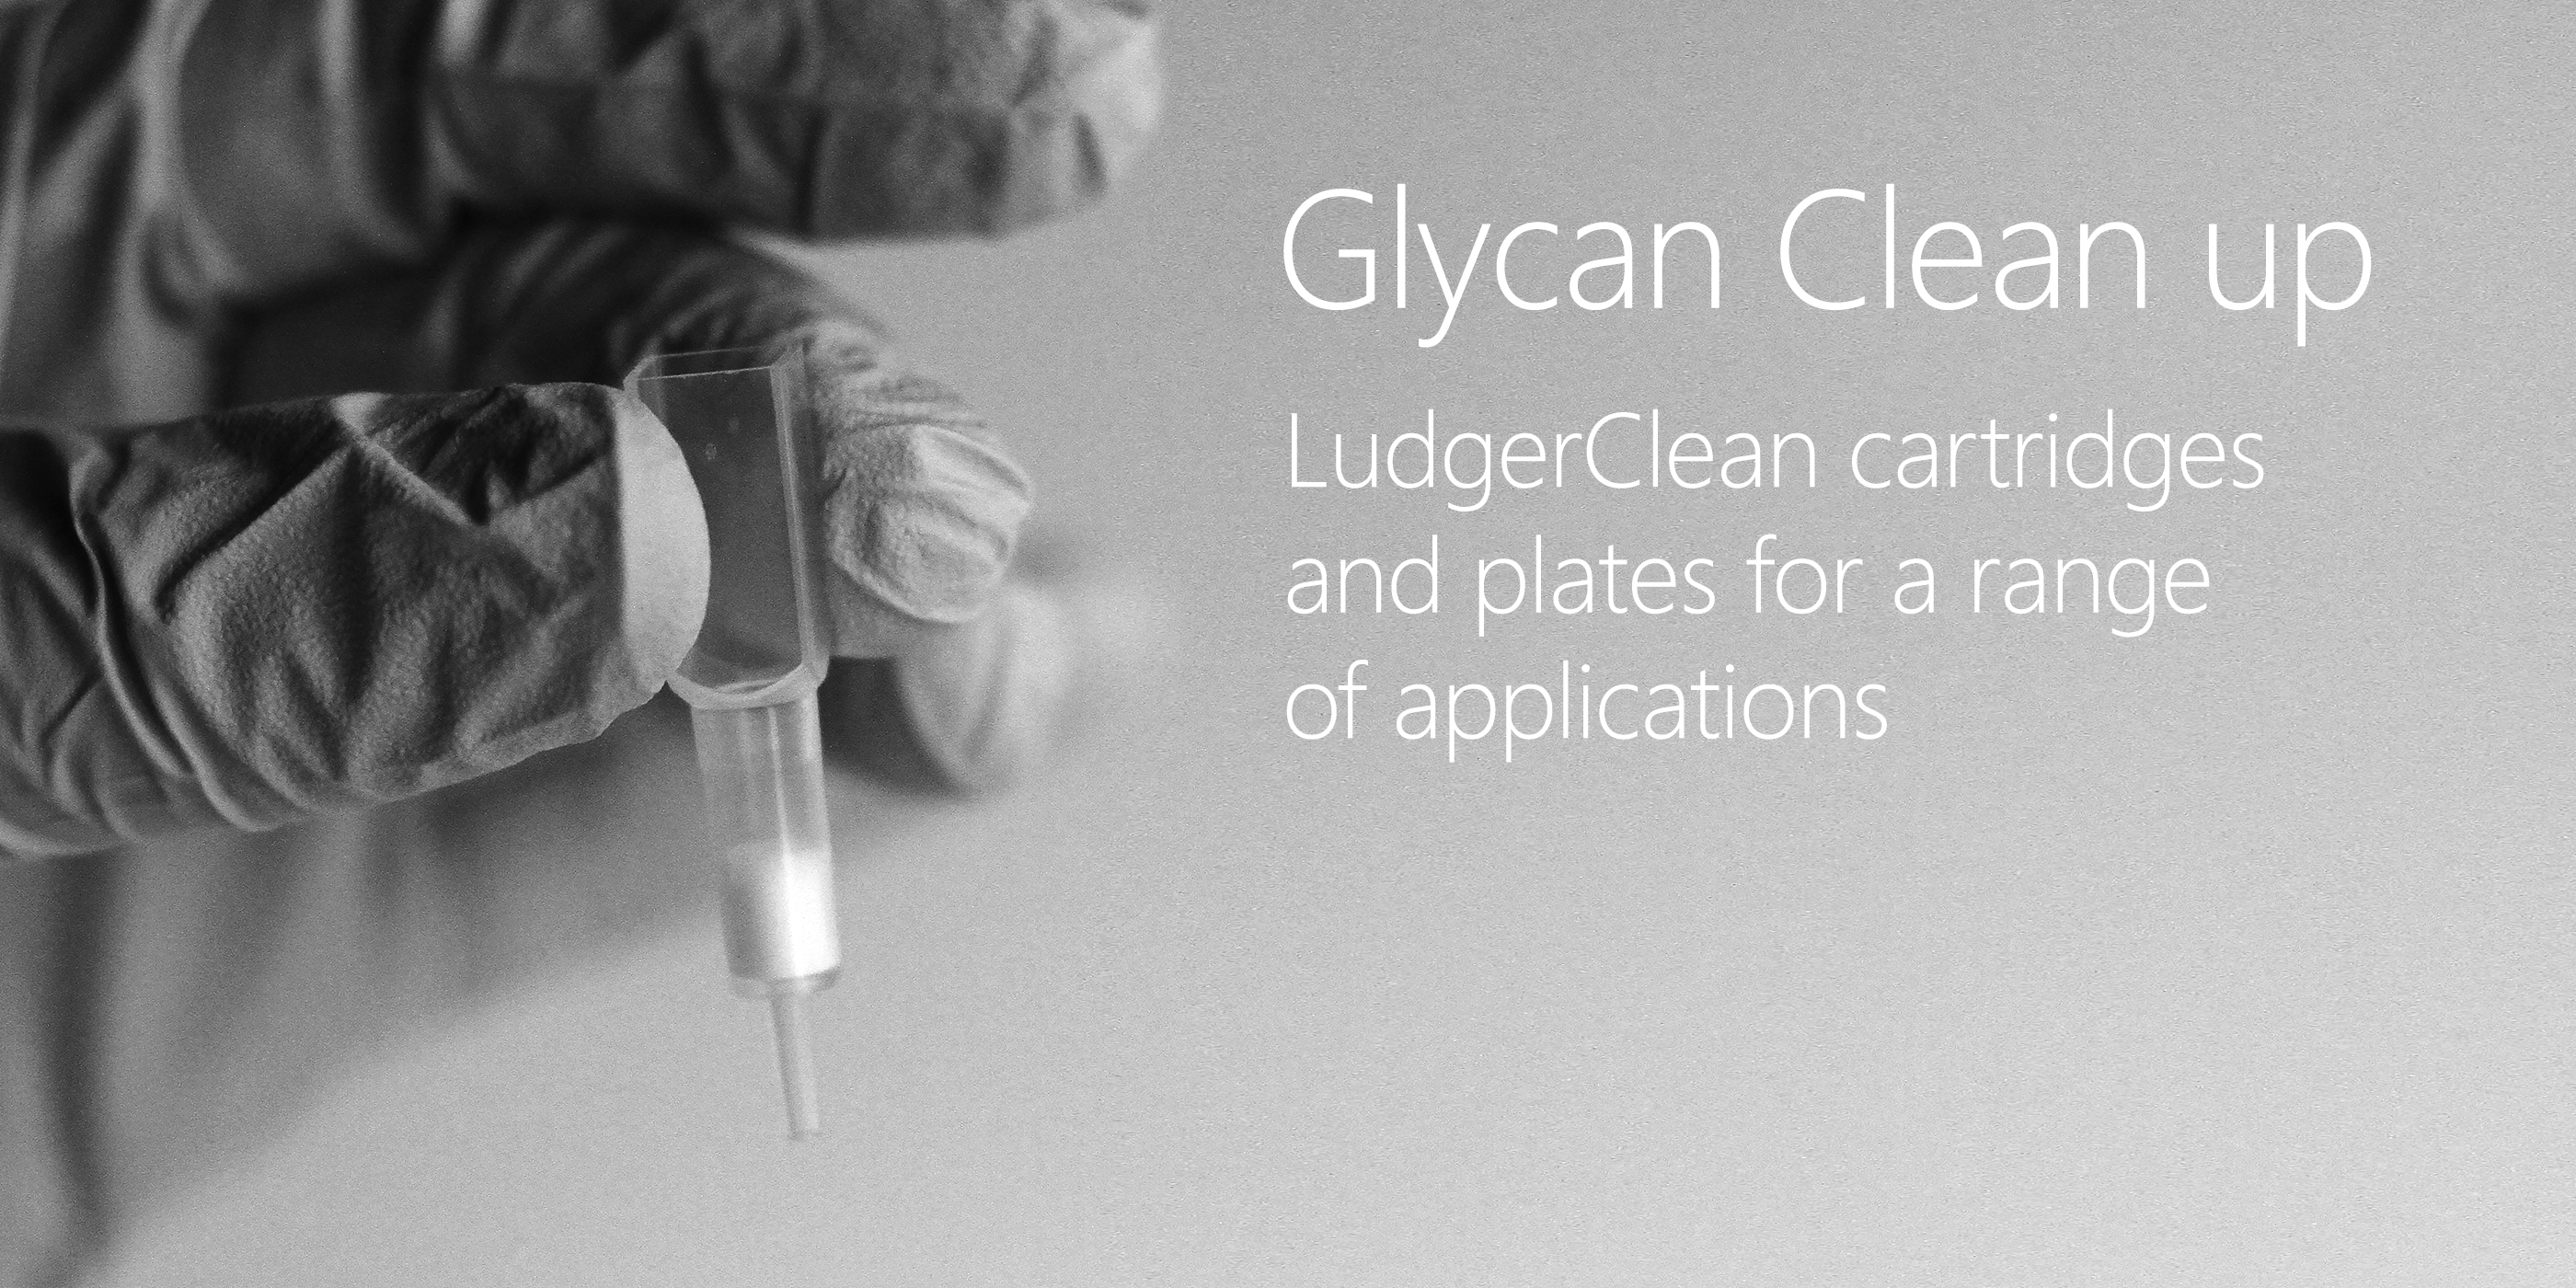 ludgerclean cartridges and plates